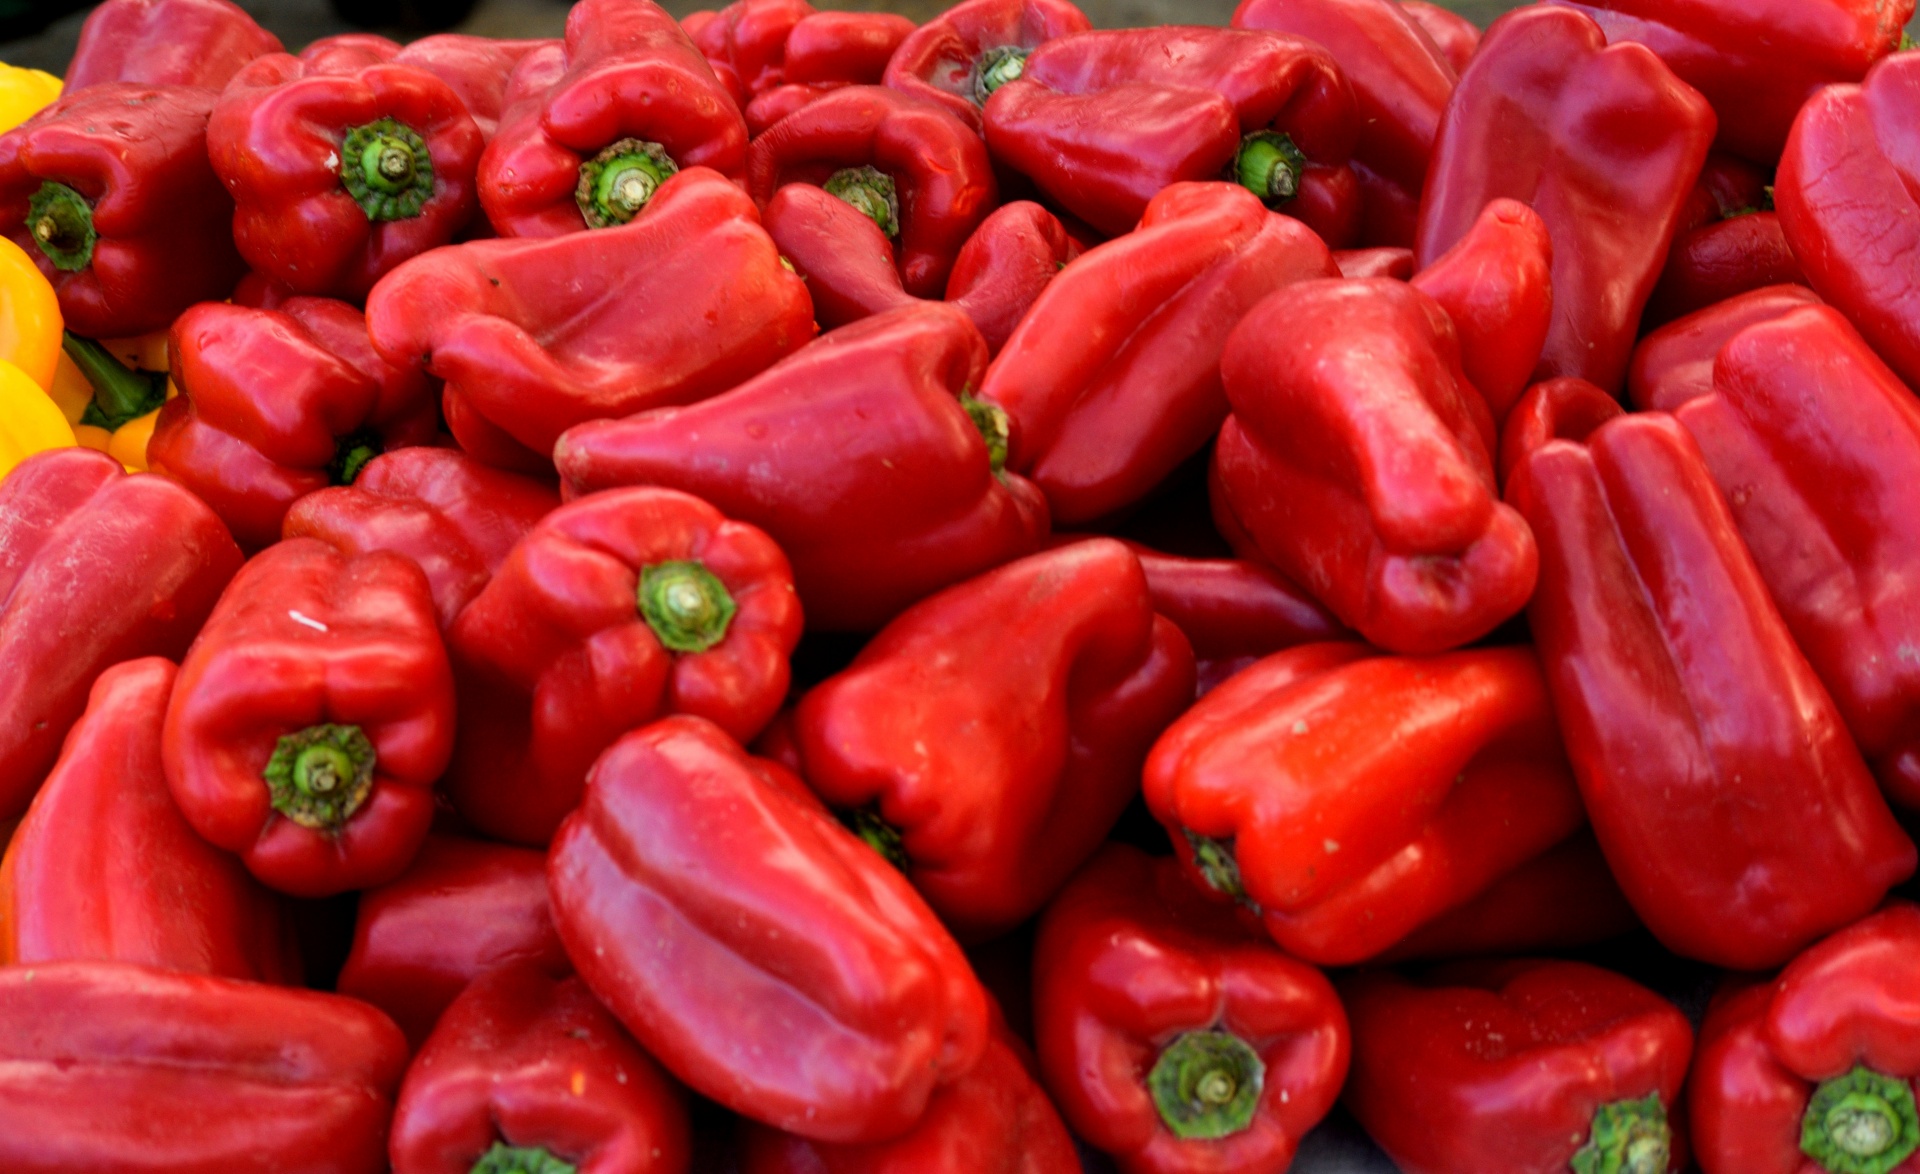 Red peppers for sale at outdoor market place.